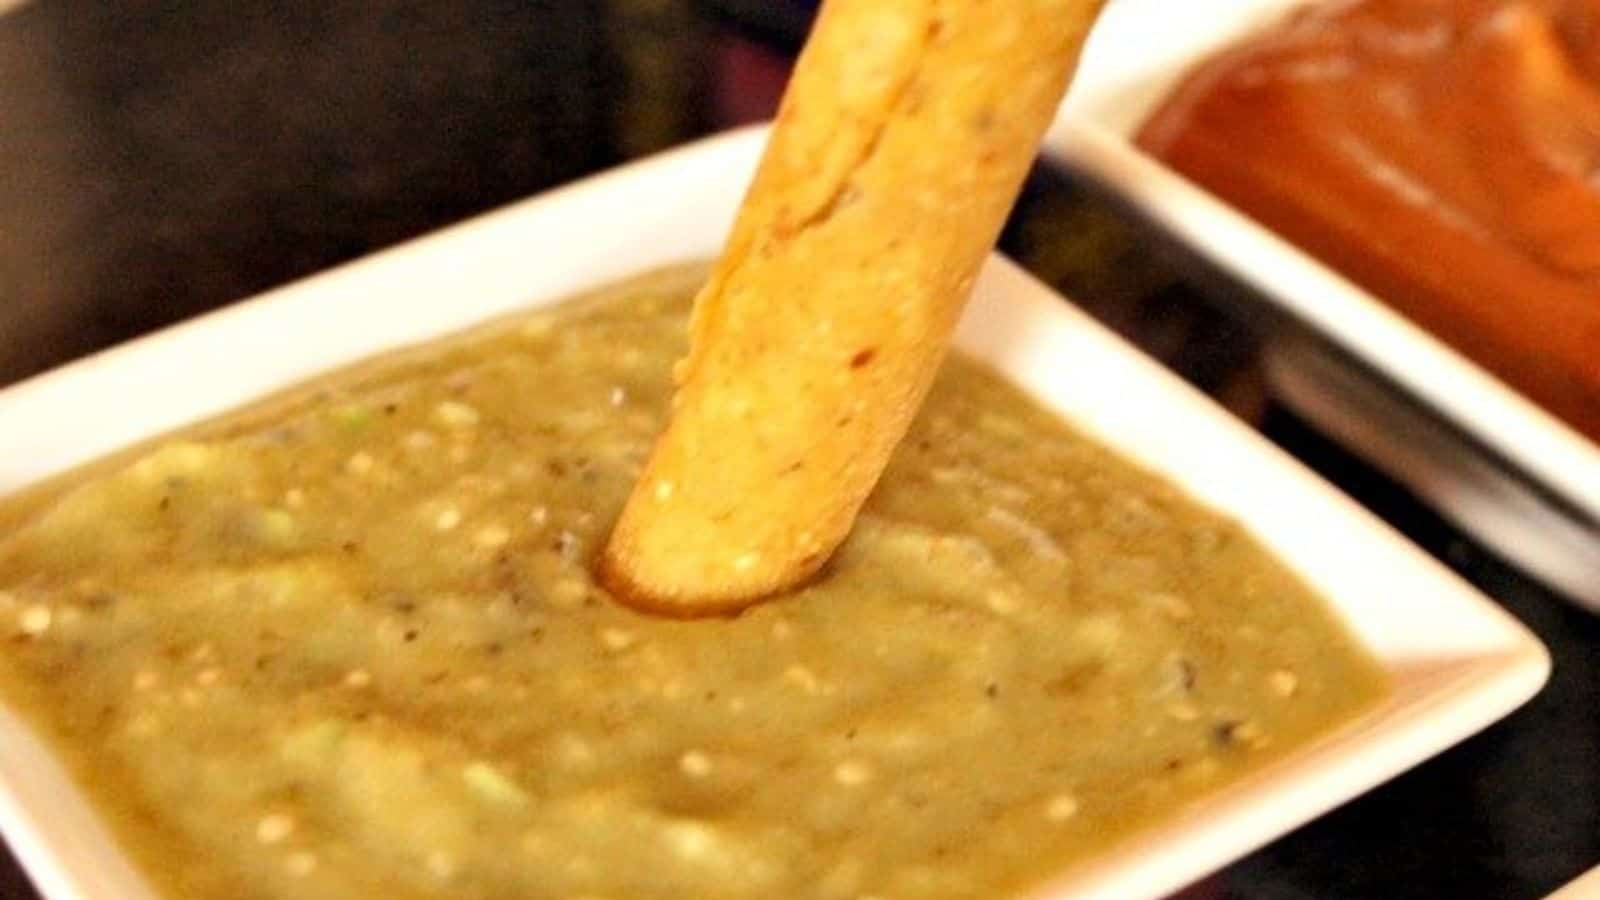 Image shows a taquito dipping into a white bowl of Roasted Tomatillo Salsa.